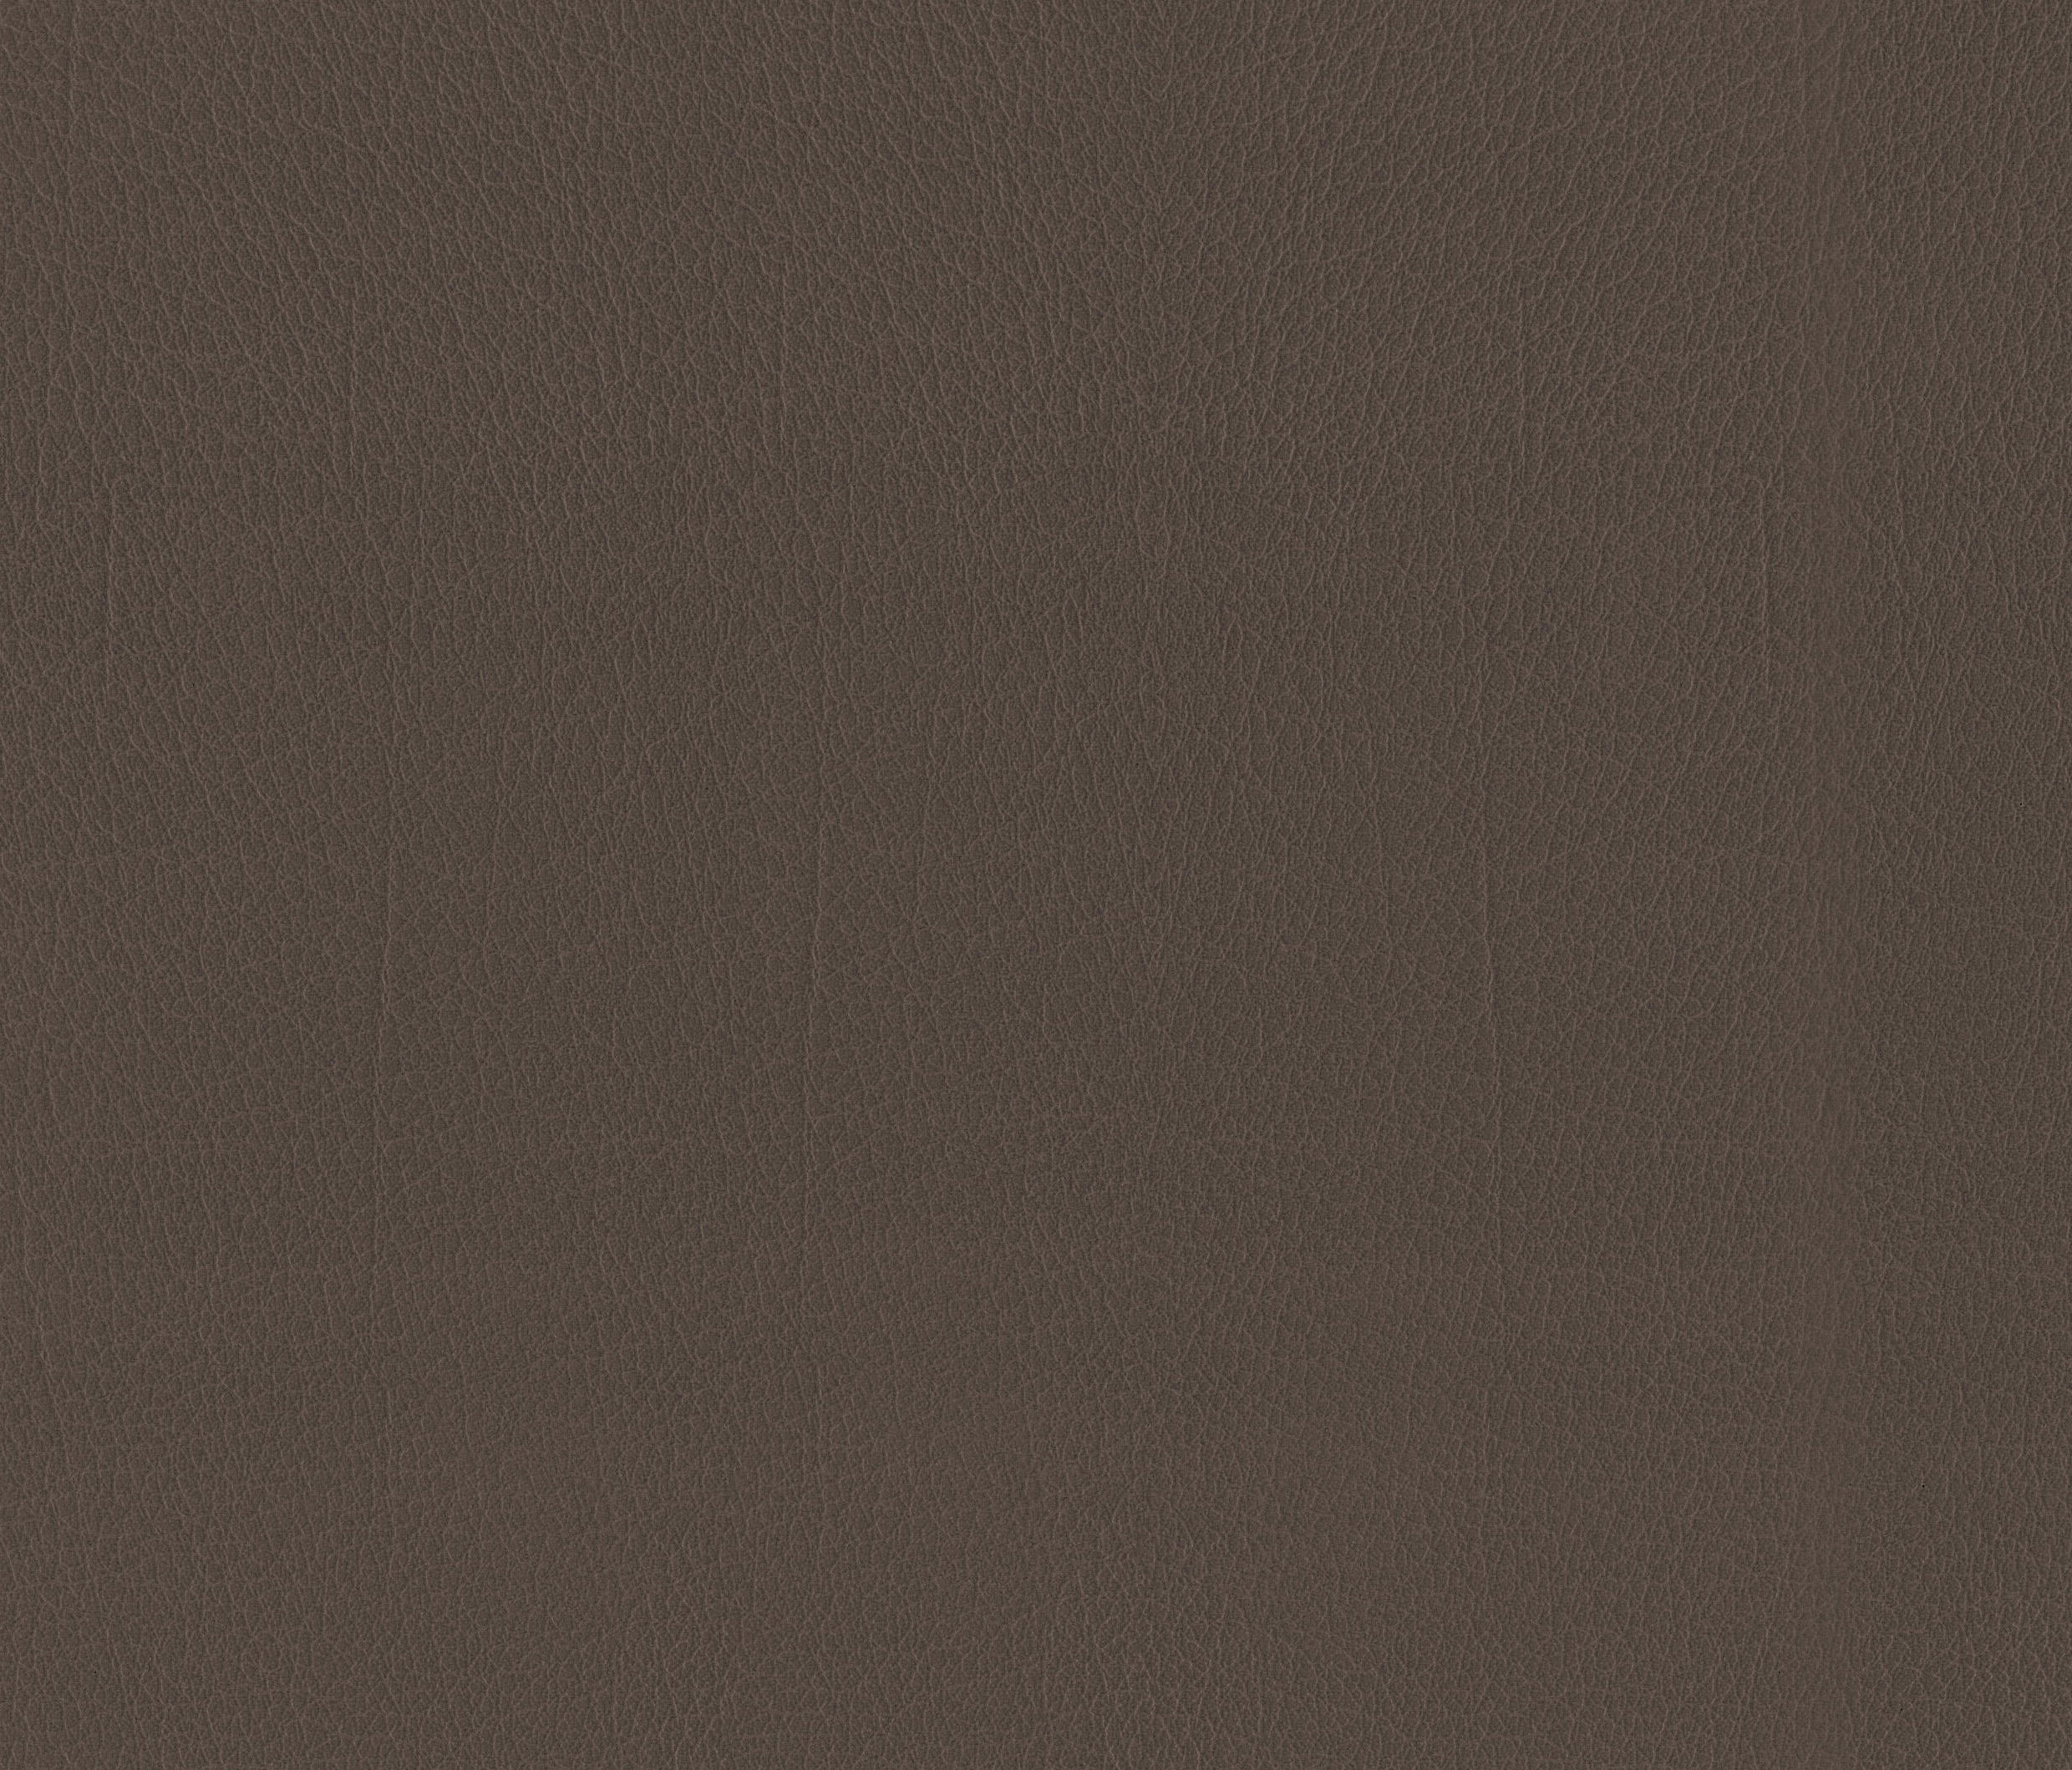 COMO | METEOR - Faux leather from MI-Millennium International | Architonic